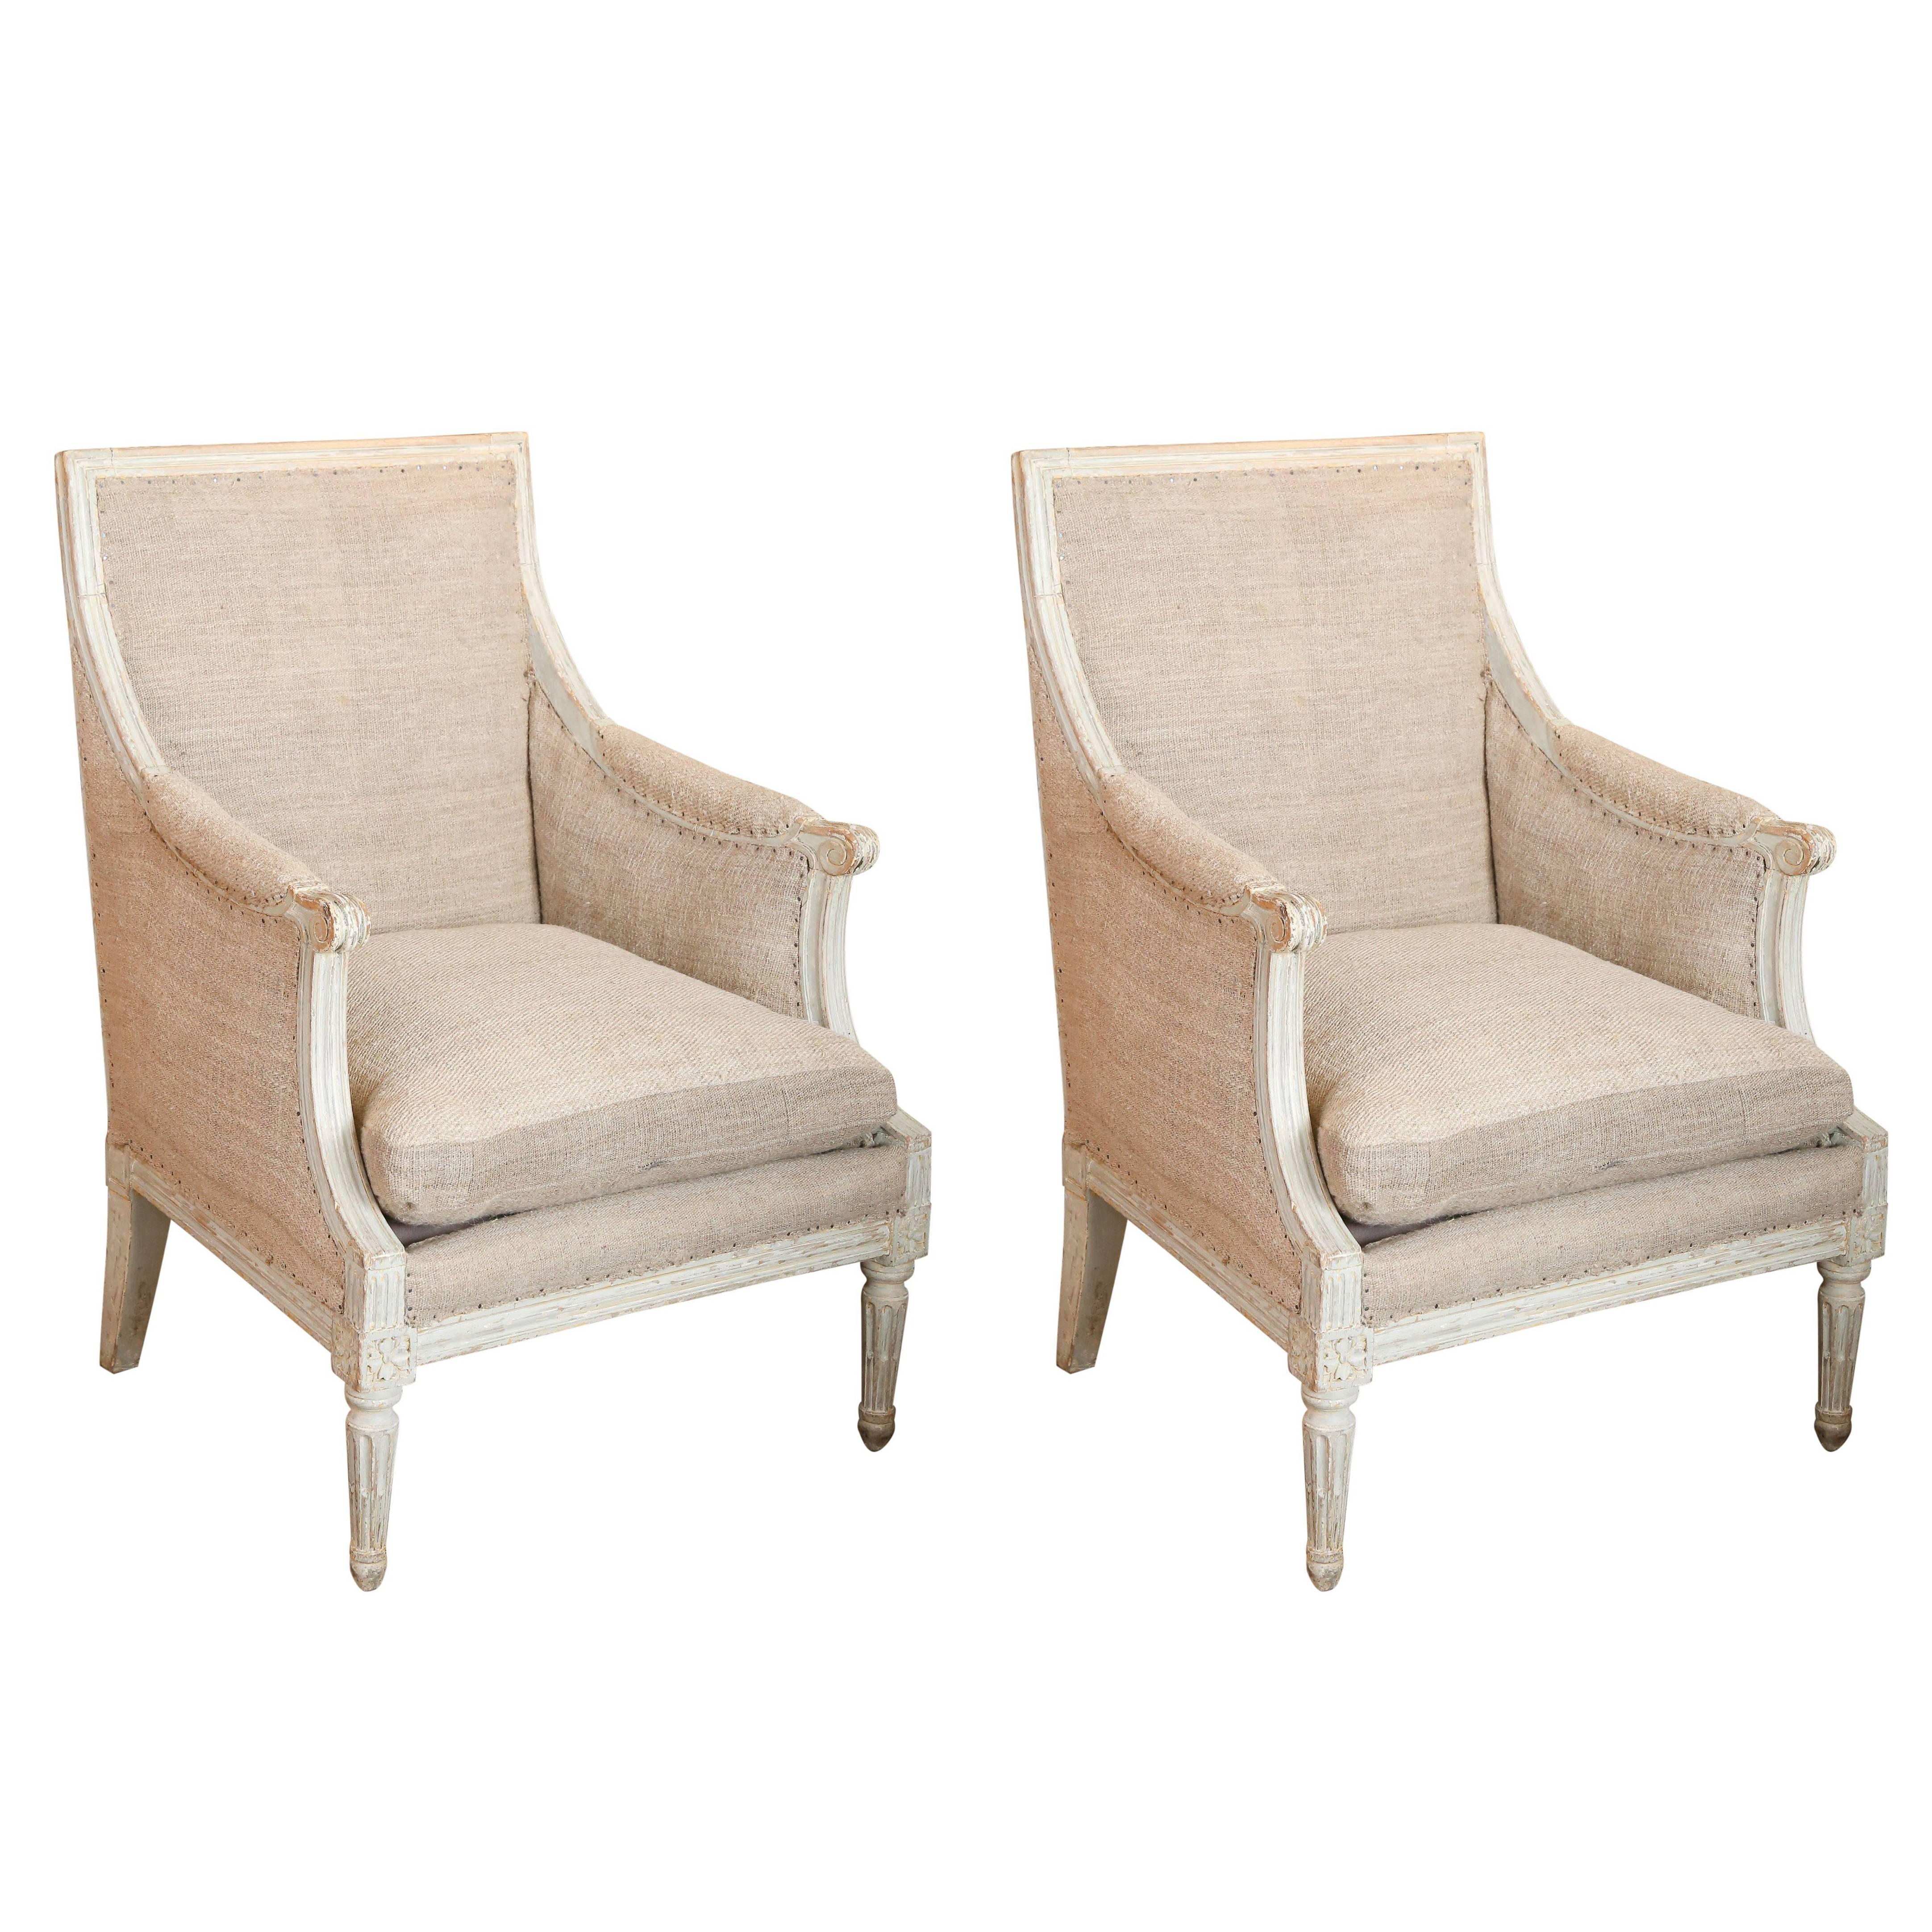 Pair of Directoire Painted Bergeres Upholstered in Burlap